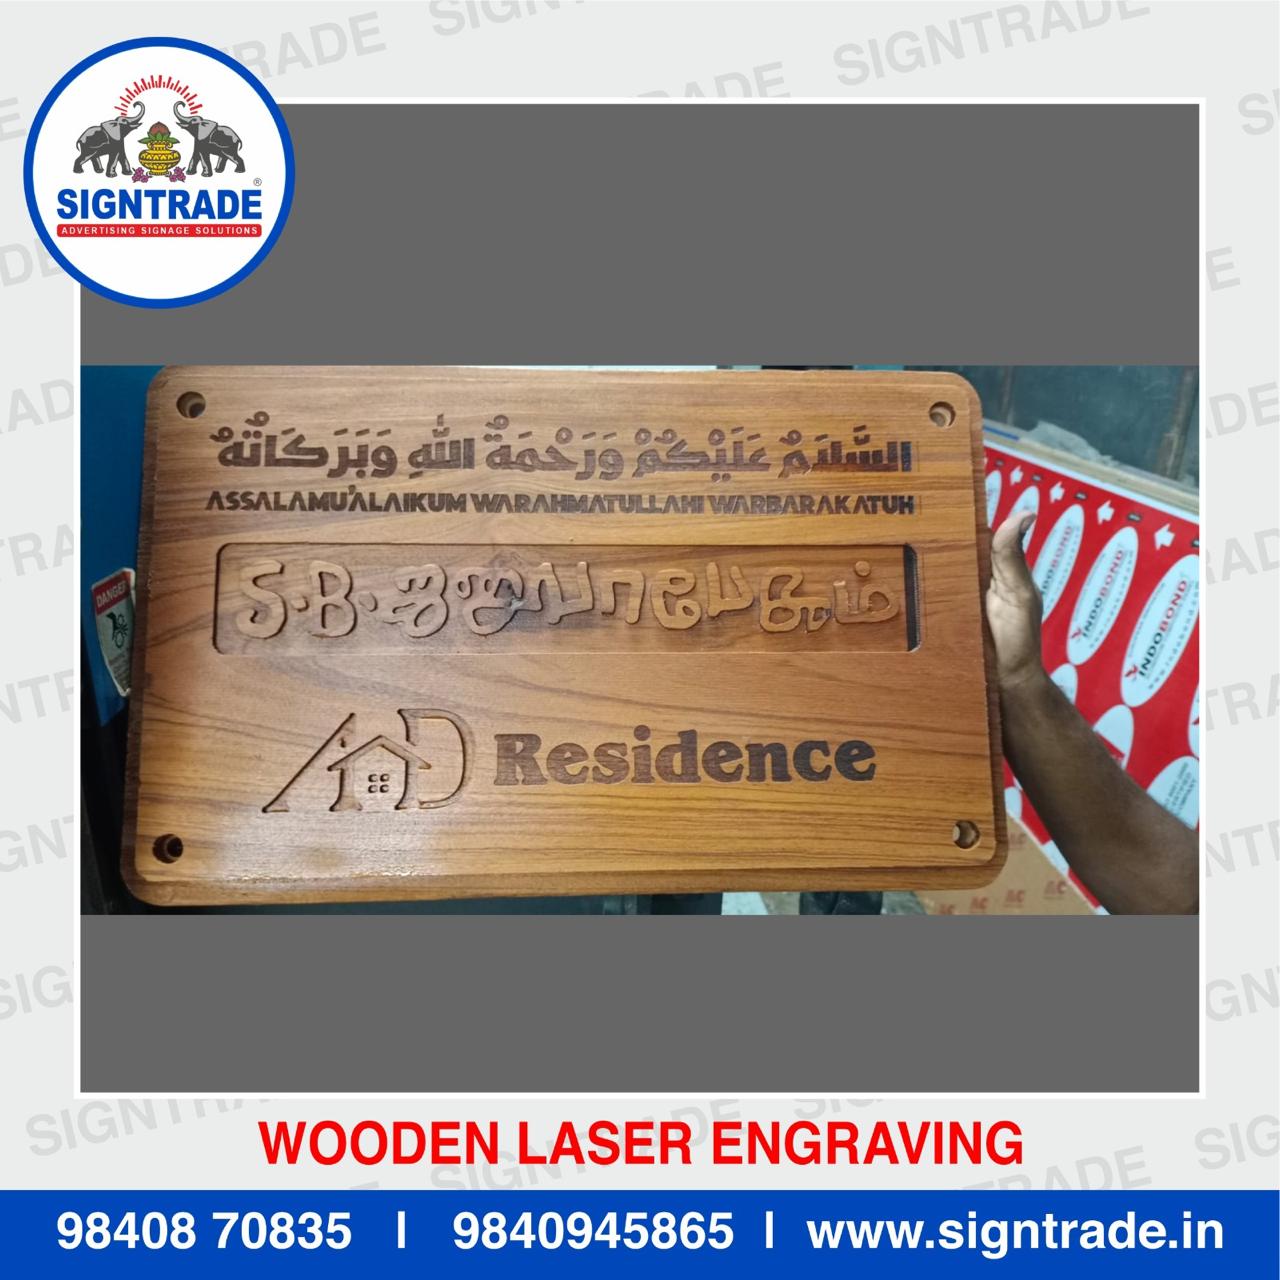 Wooden Laser Engraving Services in Chennai